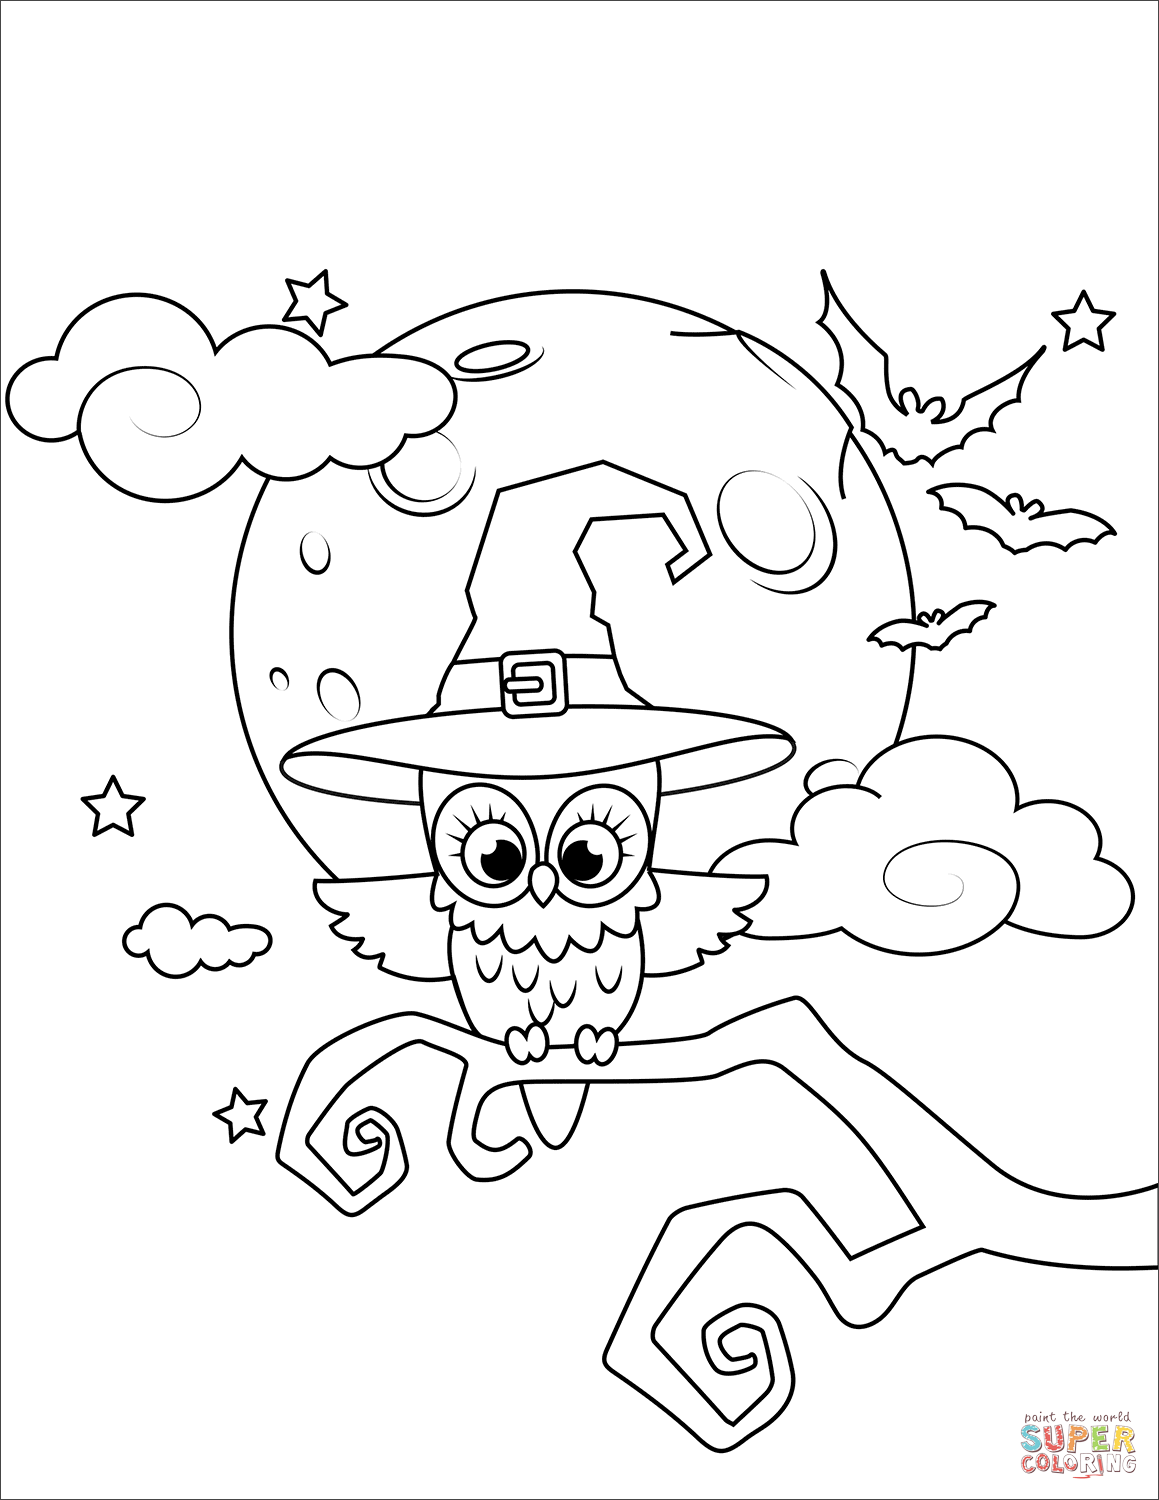 Owl in a witch hat coloring page free printable coloring pages